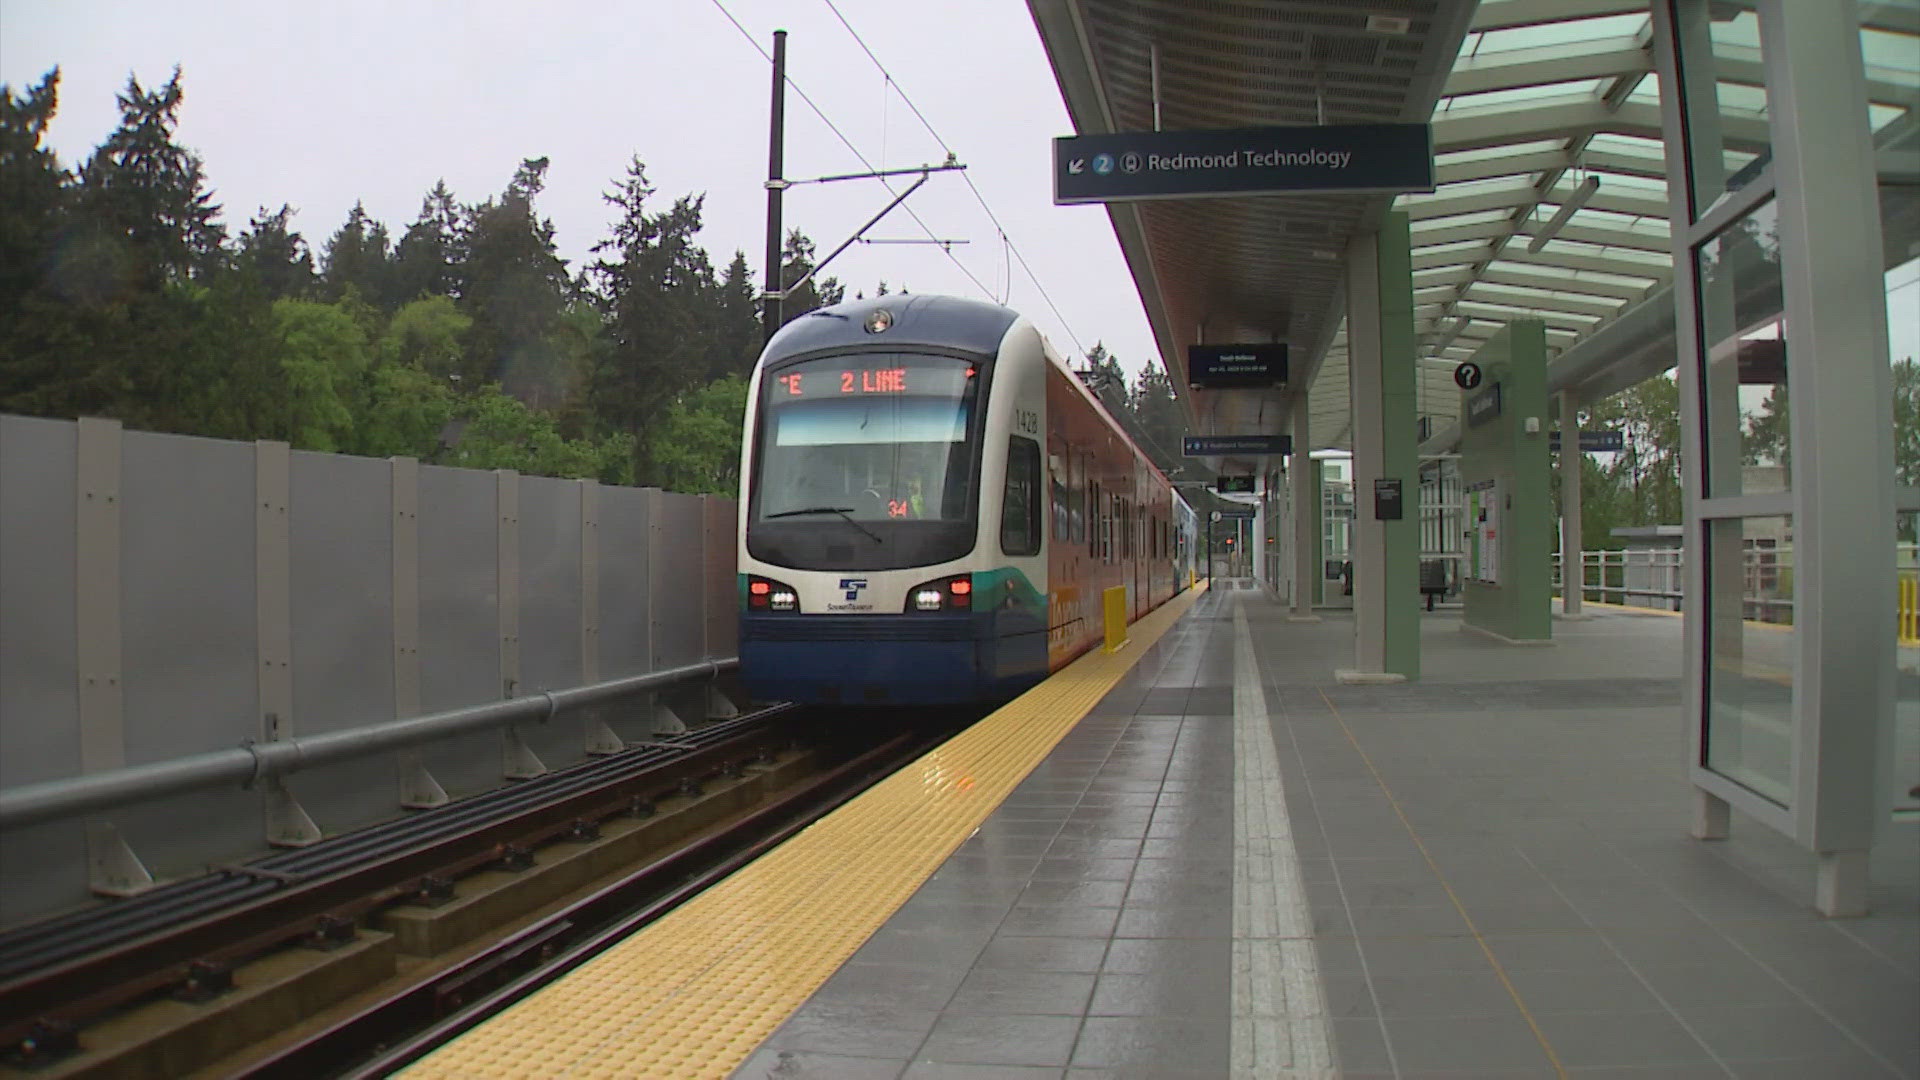 The trip from Redmond to South Bellevue station takes 15 minutes.